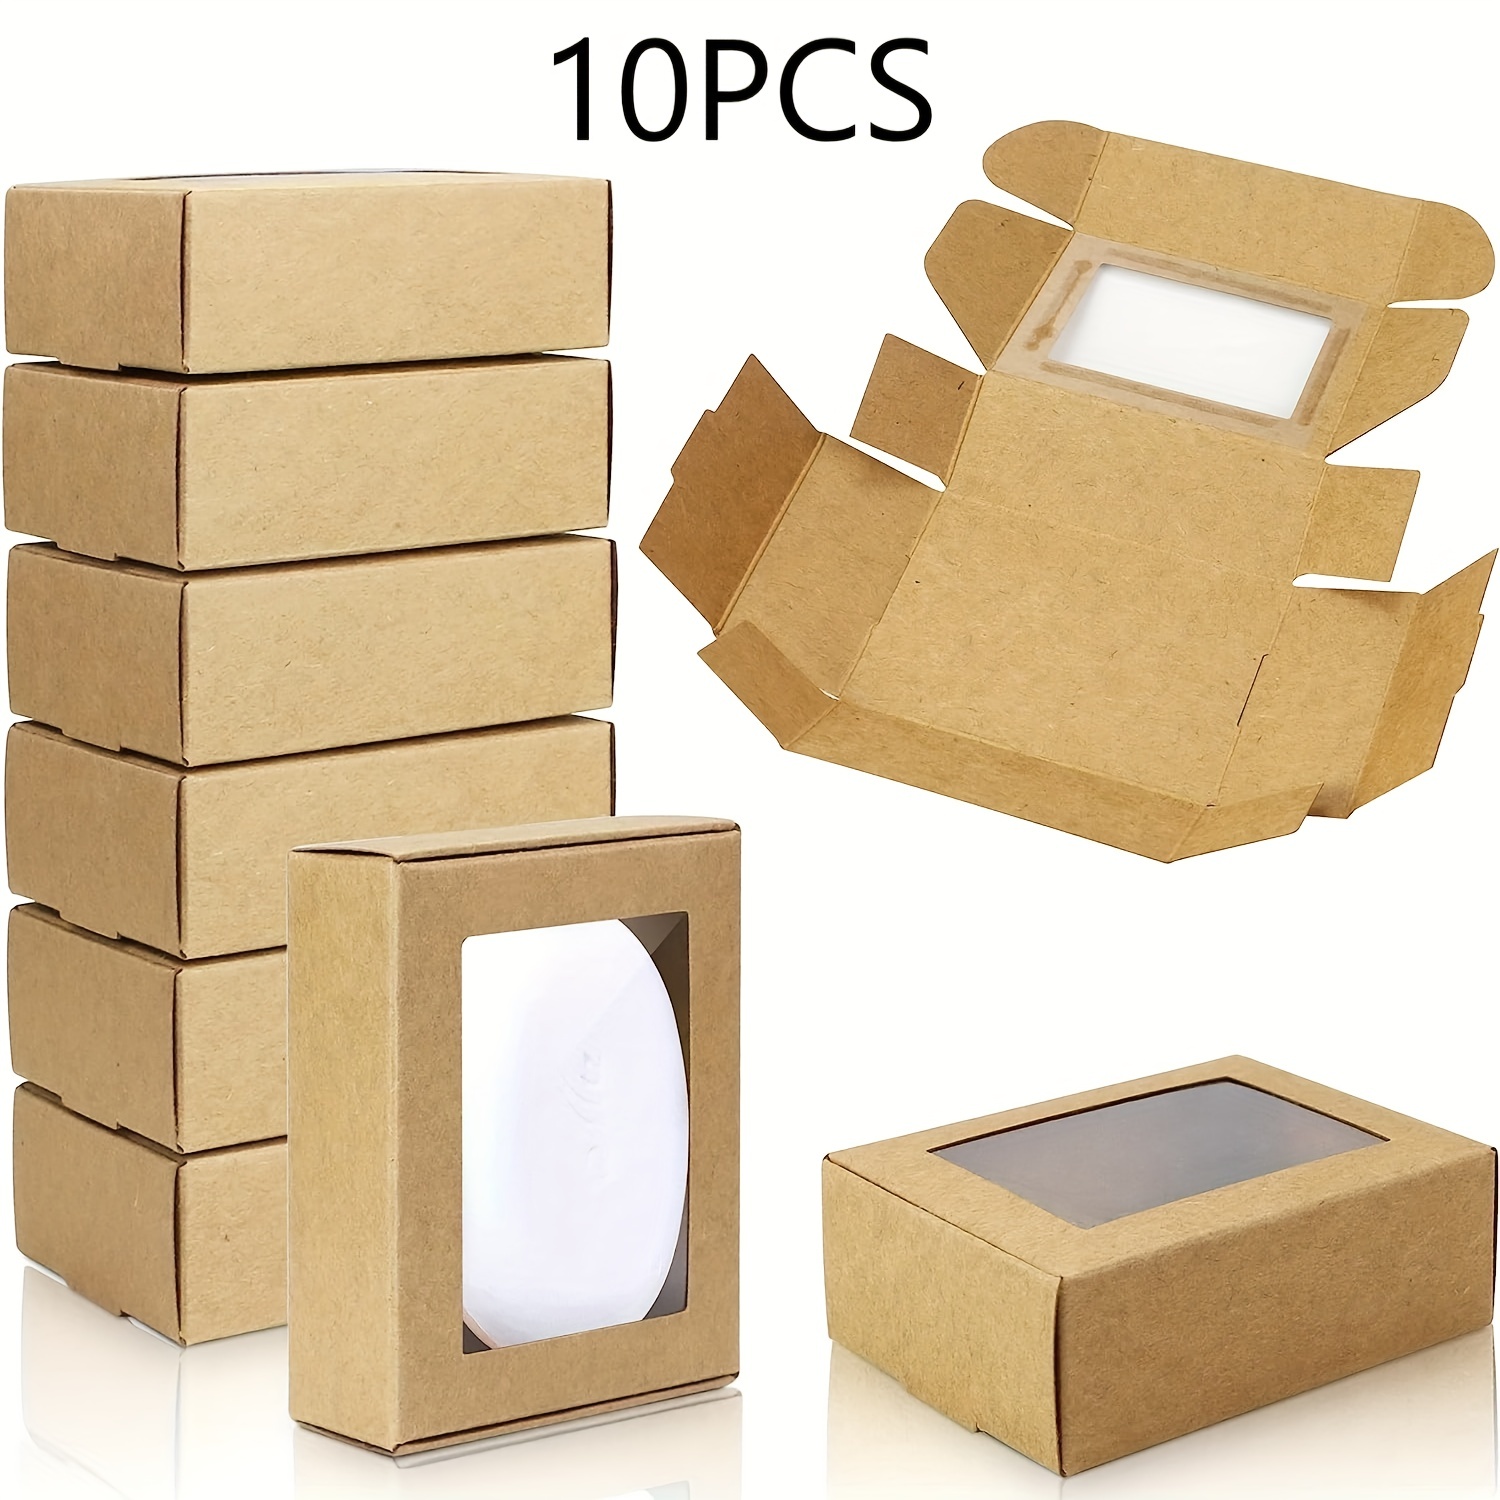 10pcs Mini Paper Box With Window Soap Packaging Box Present Packaging Box,  Treat Box For Homemade Soap Favor Treat Bakery Candy